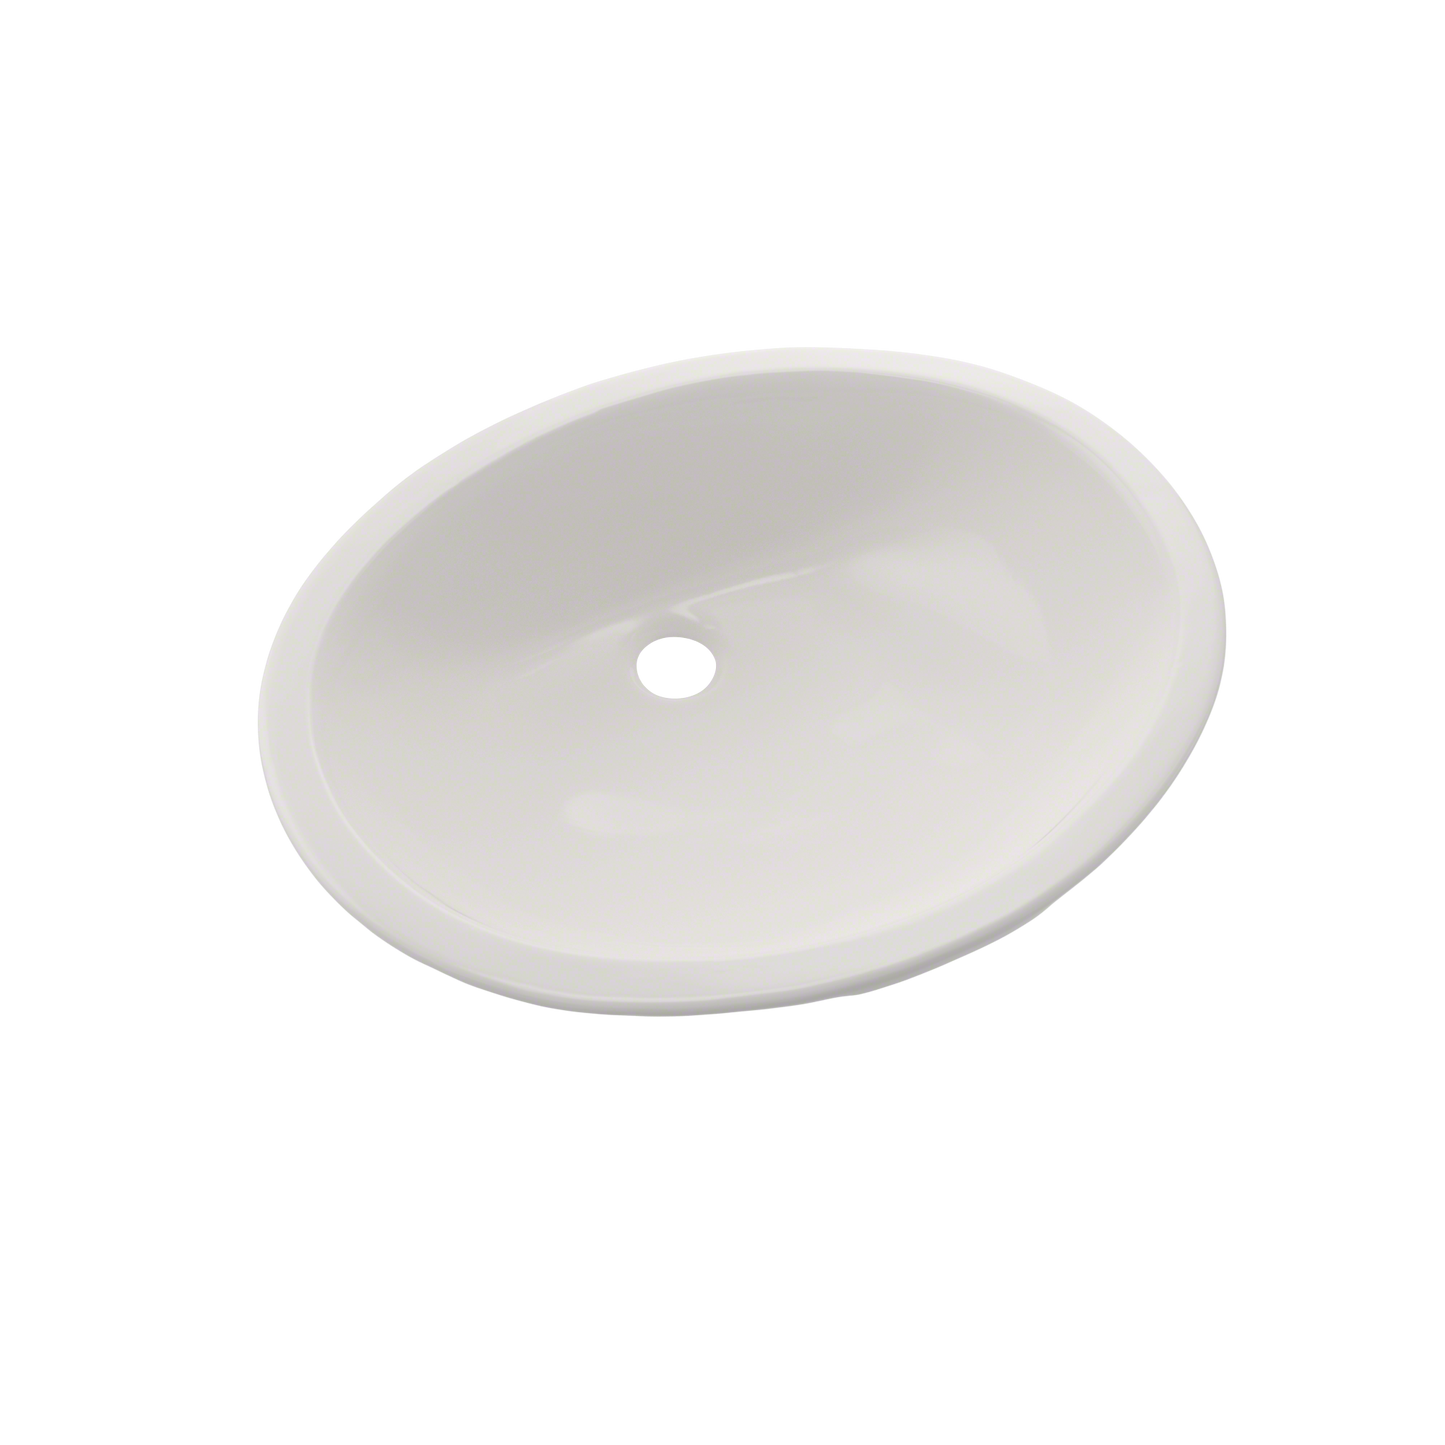 Toto LT579G#11 - Rendezvous 17" Undermount Bathroom Sink with Overflow and CeFiONtect Ceramic Glaze-